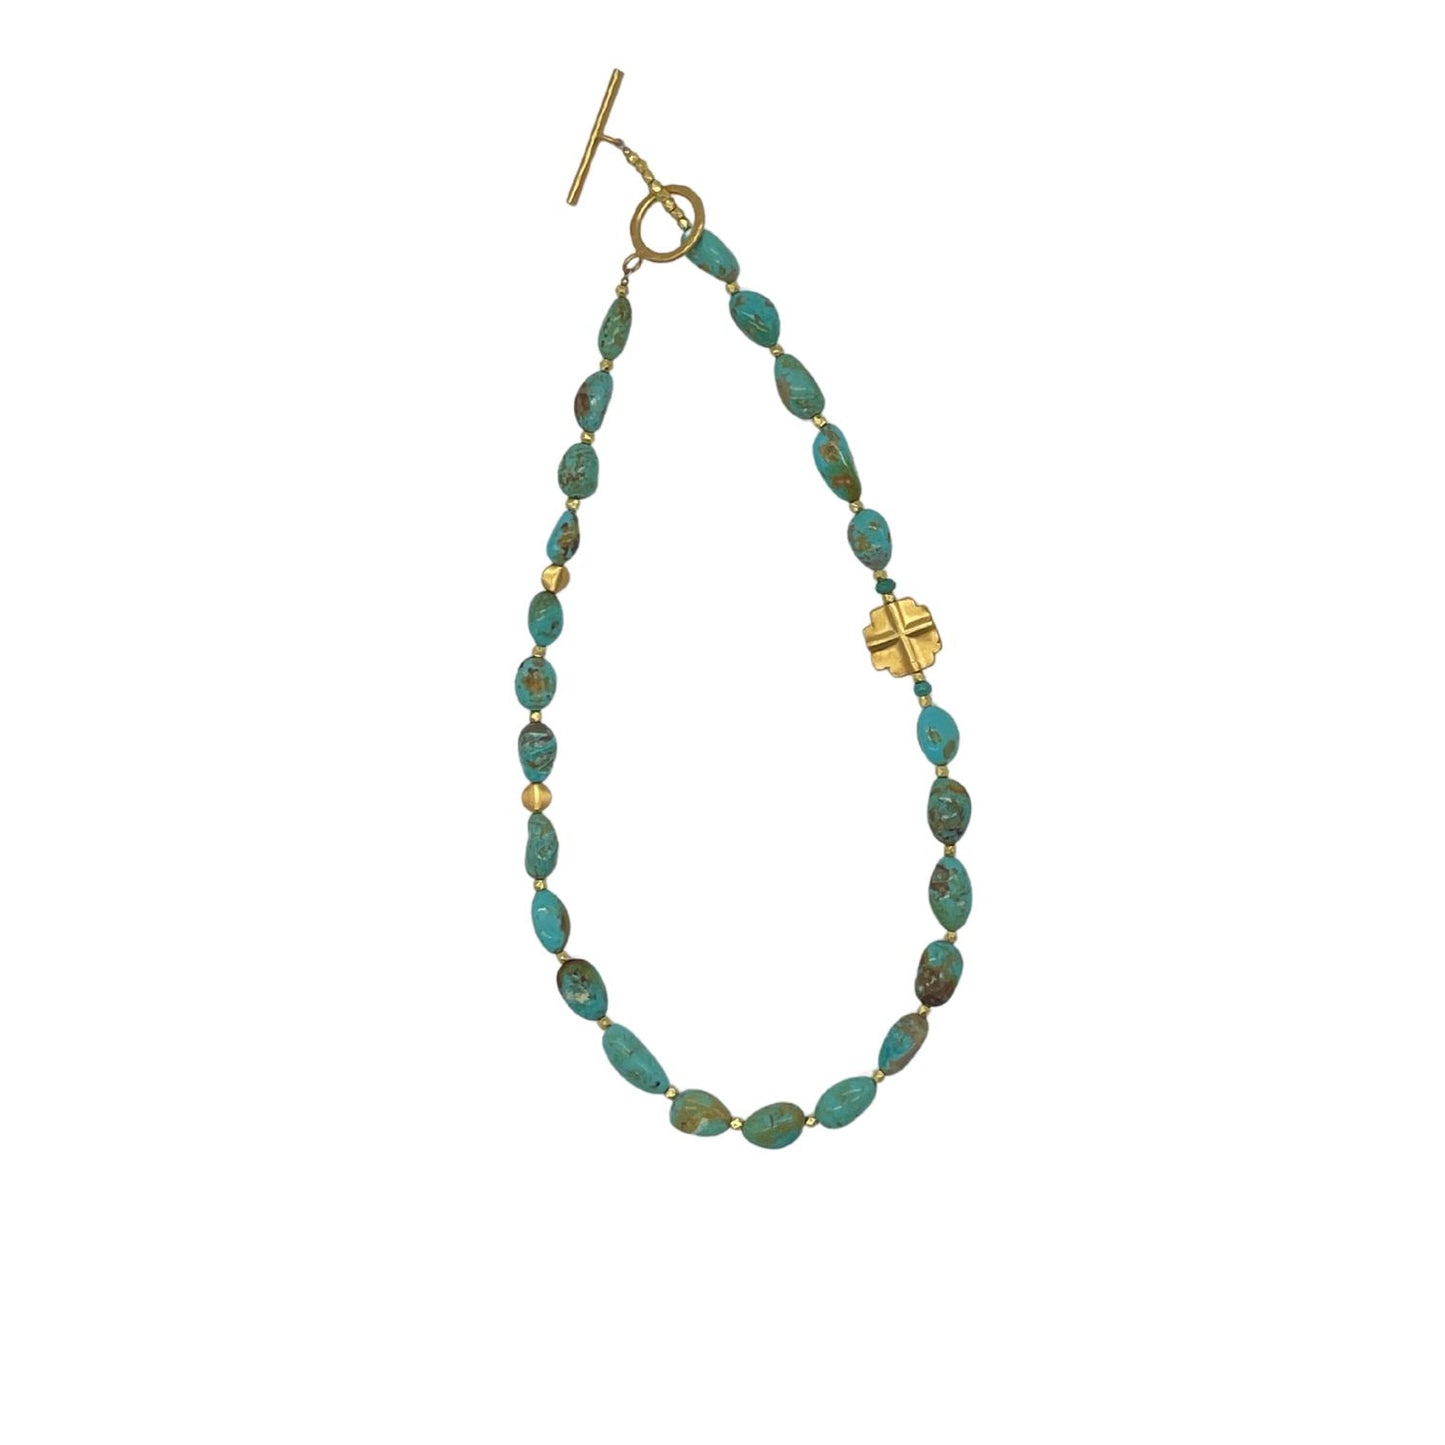 Kingman Turquoise and 22 Carat Gold Bead Necklace